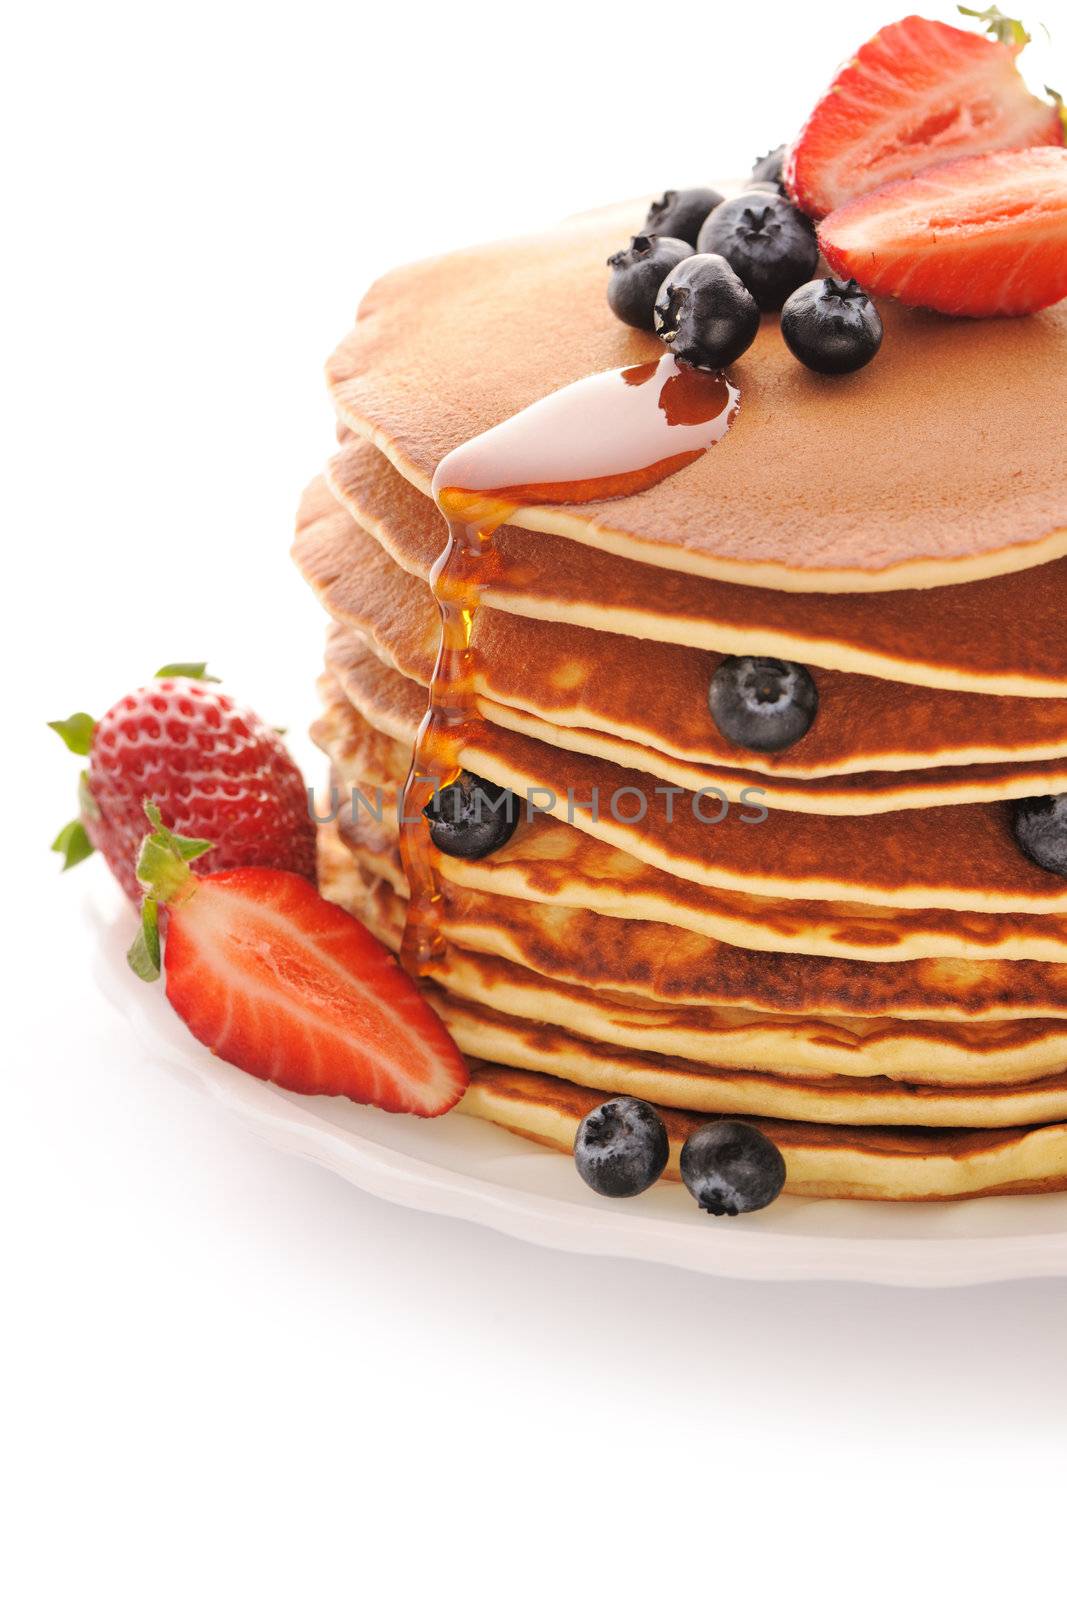 Pancakes with strawberry and blueberries by haveseen